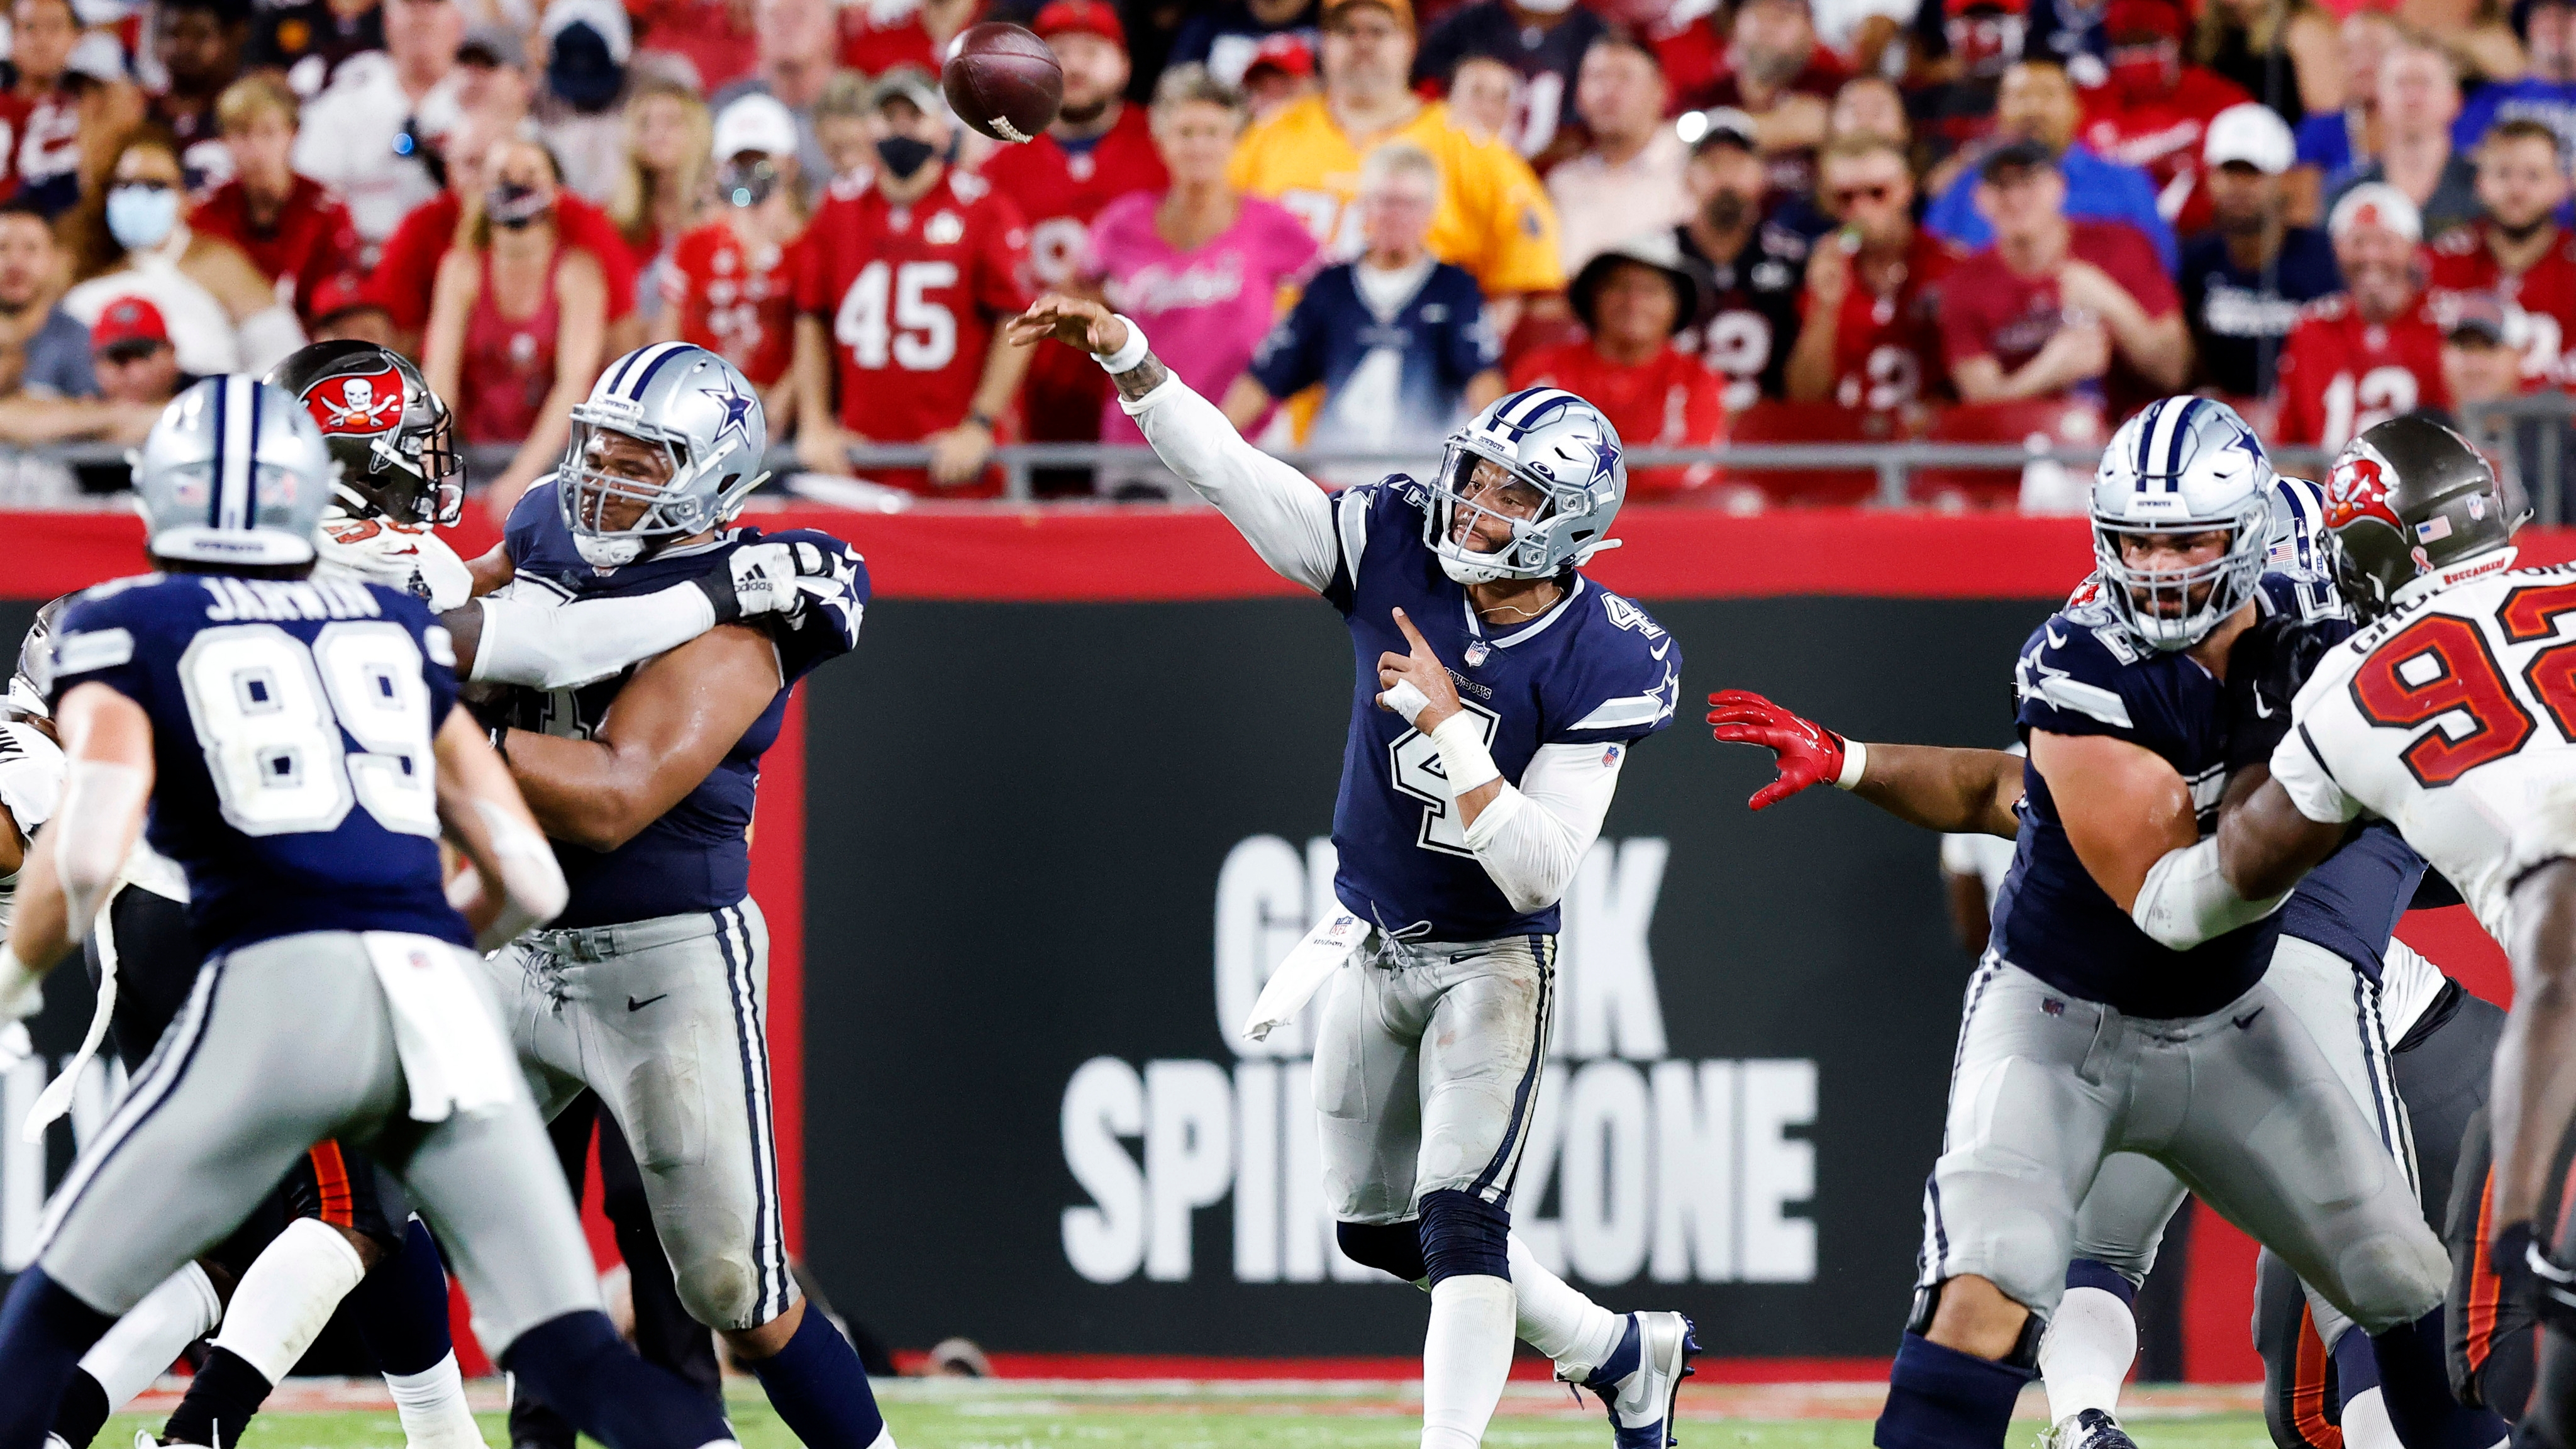 Spirits are high as Dak Prescott's return game nears, but are Cowboys  really ready for Buccaneers?